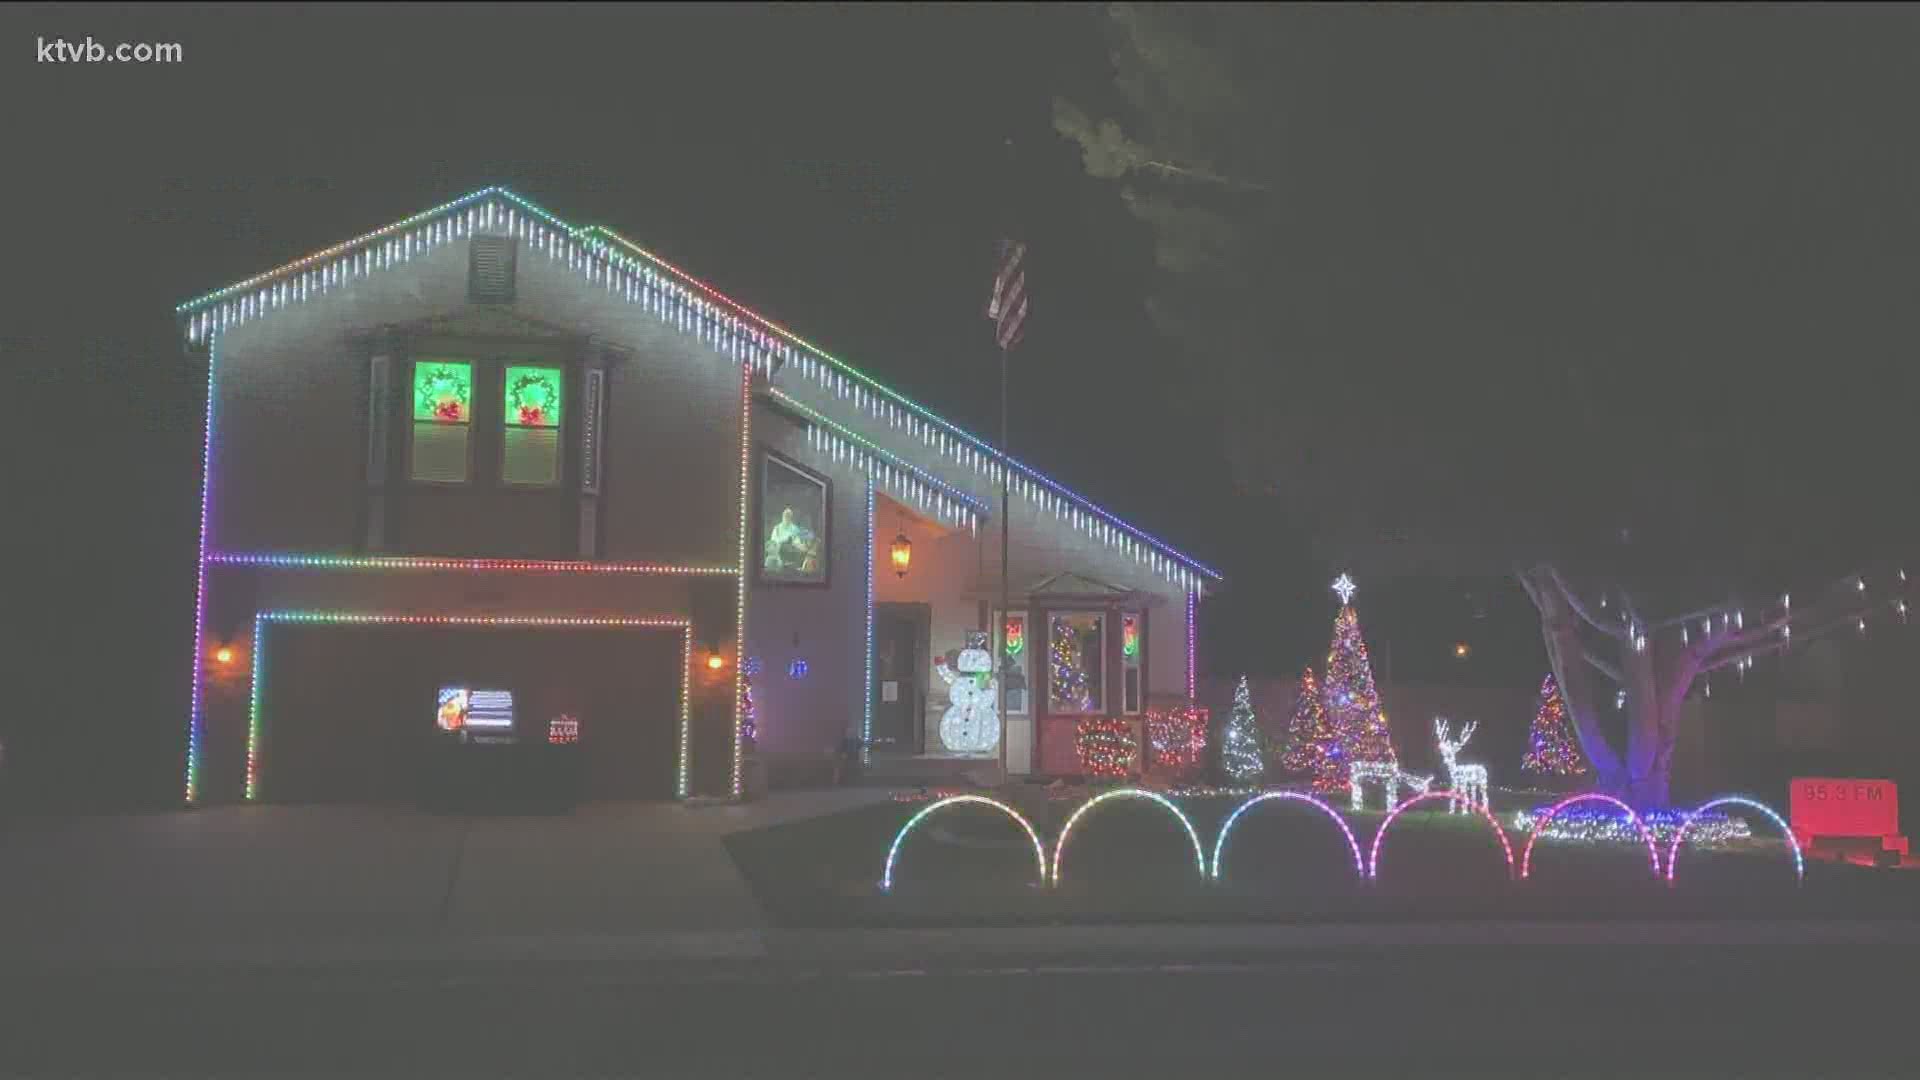 The men behind these impressive light shows say they enjoy bringing some holiday cheer to people.